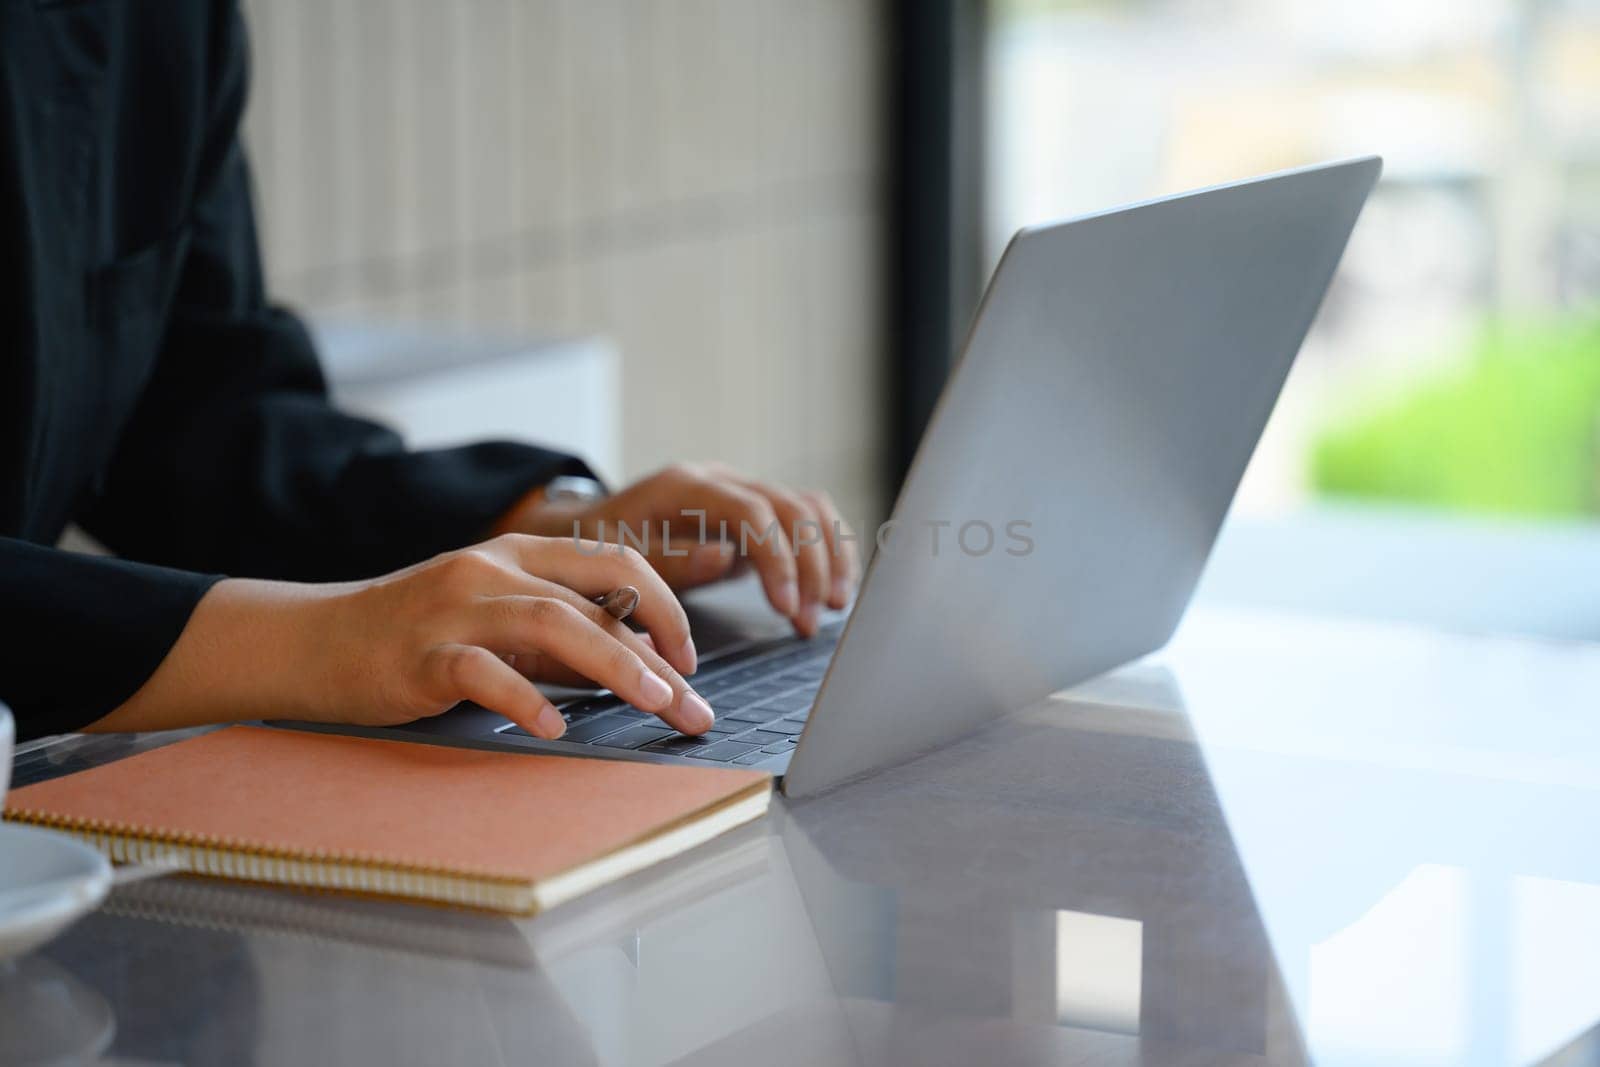 Closeup image of businesswoman hands typing on laptop surfing the internet or online working.